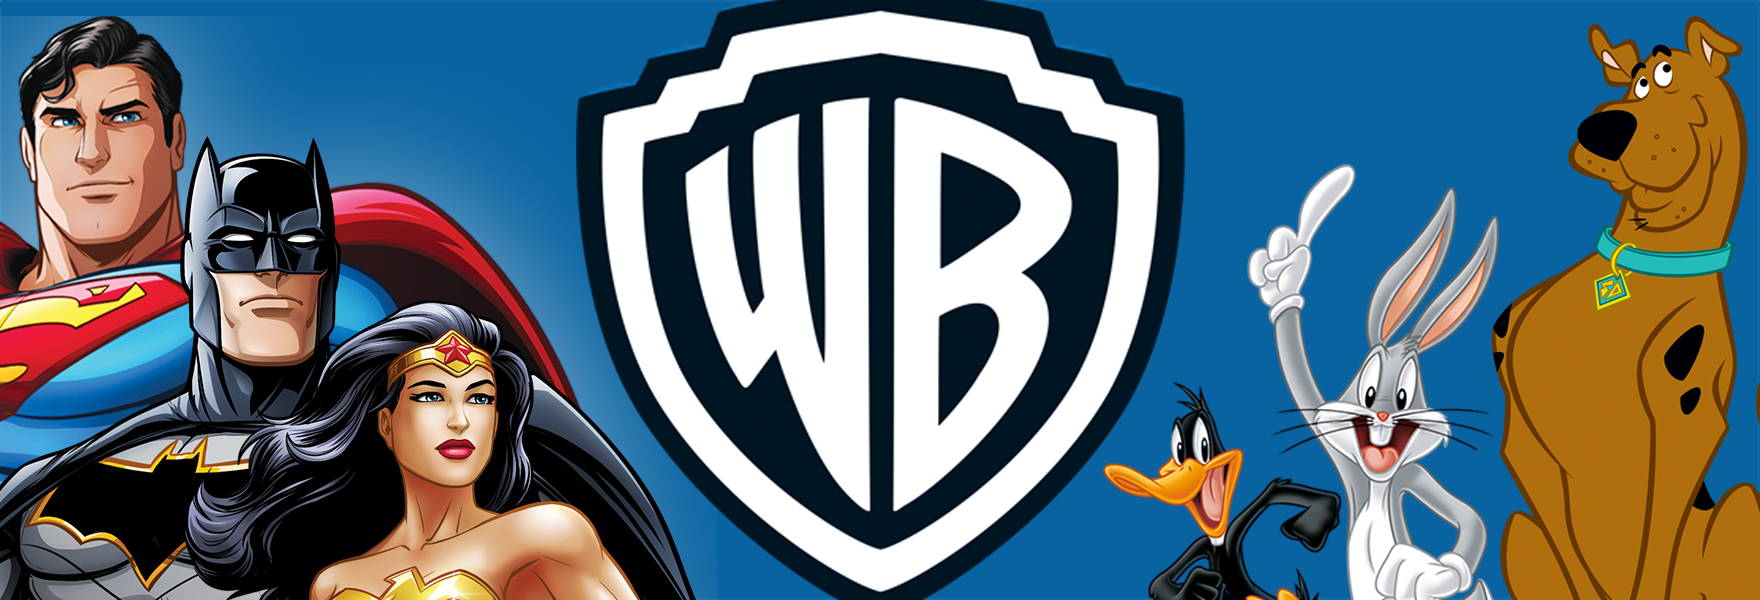 Warner Brothers logo surrounded by classic cartoon heroes including the DC gang, scooby doo, and bugs bunny and daffy duck. 